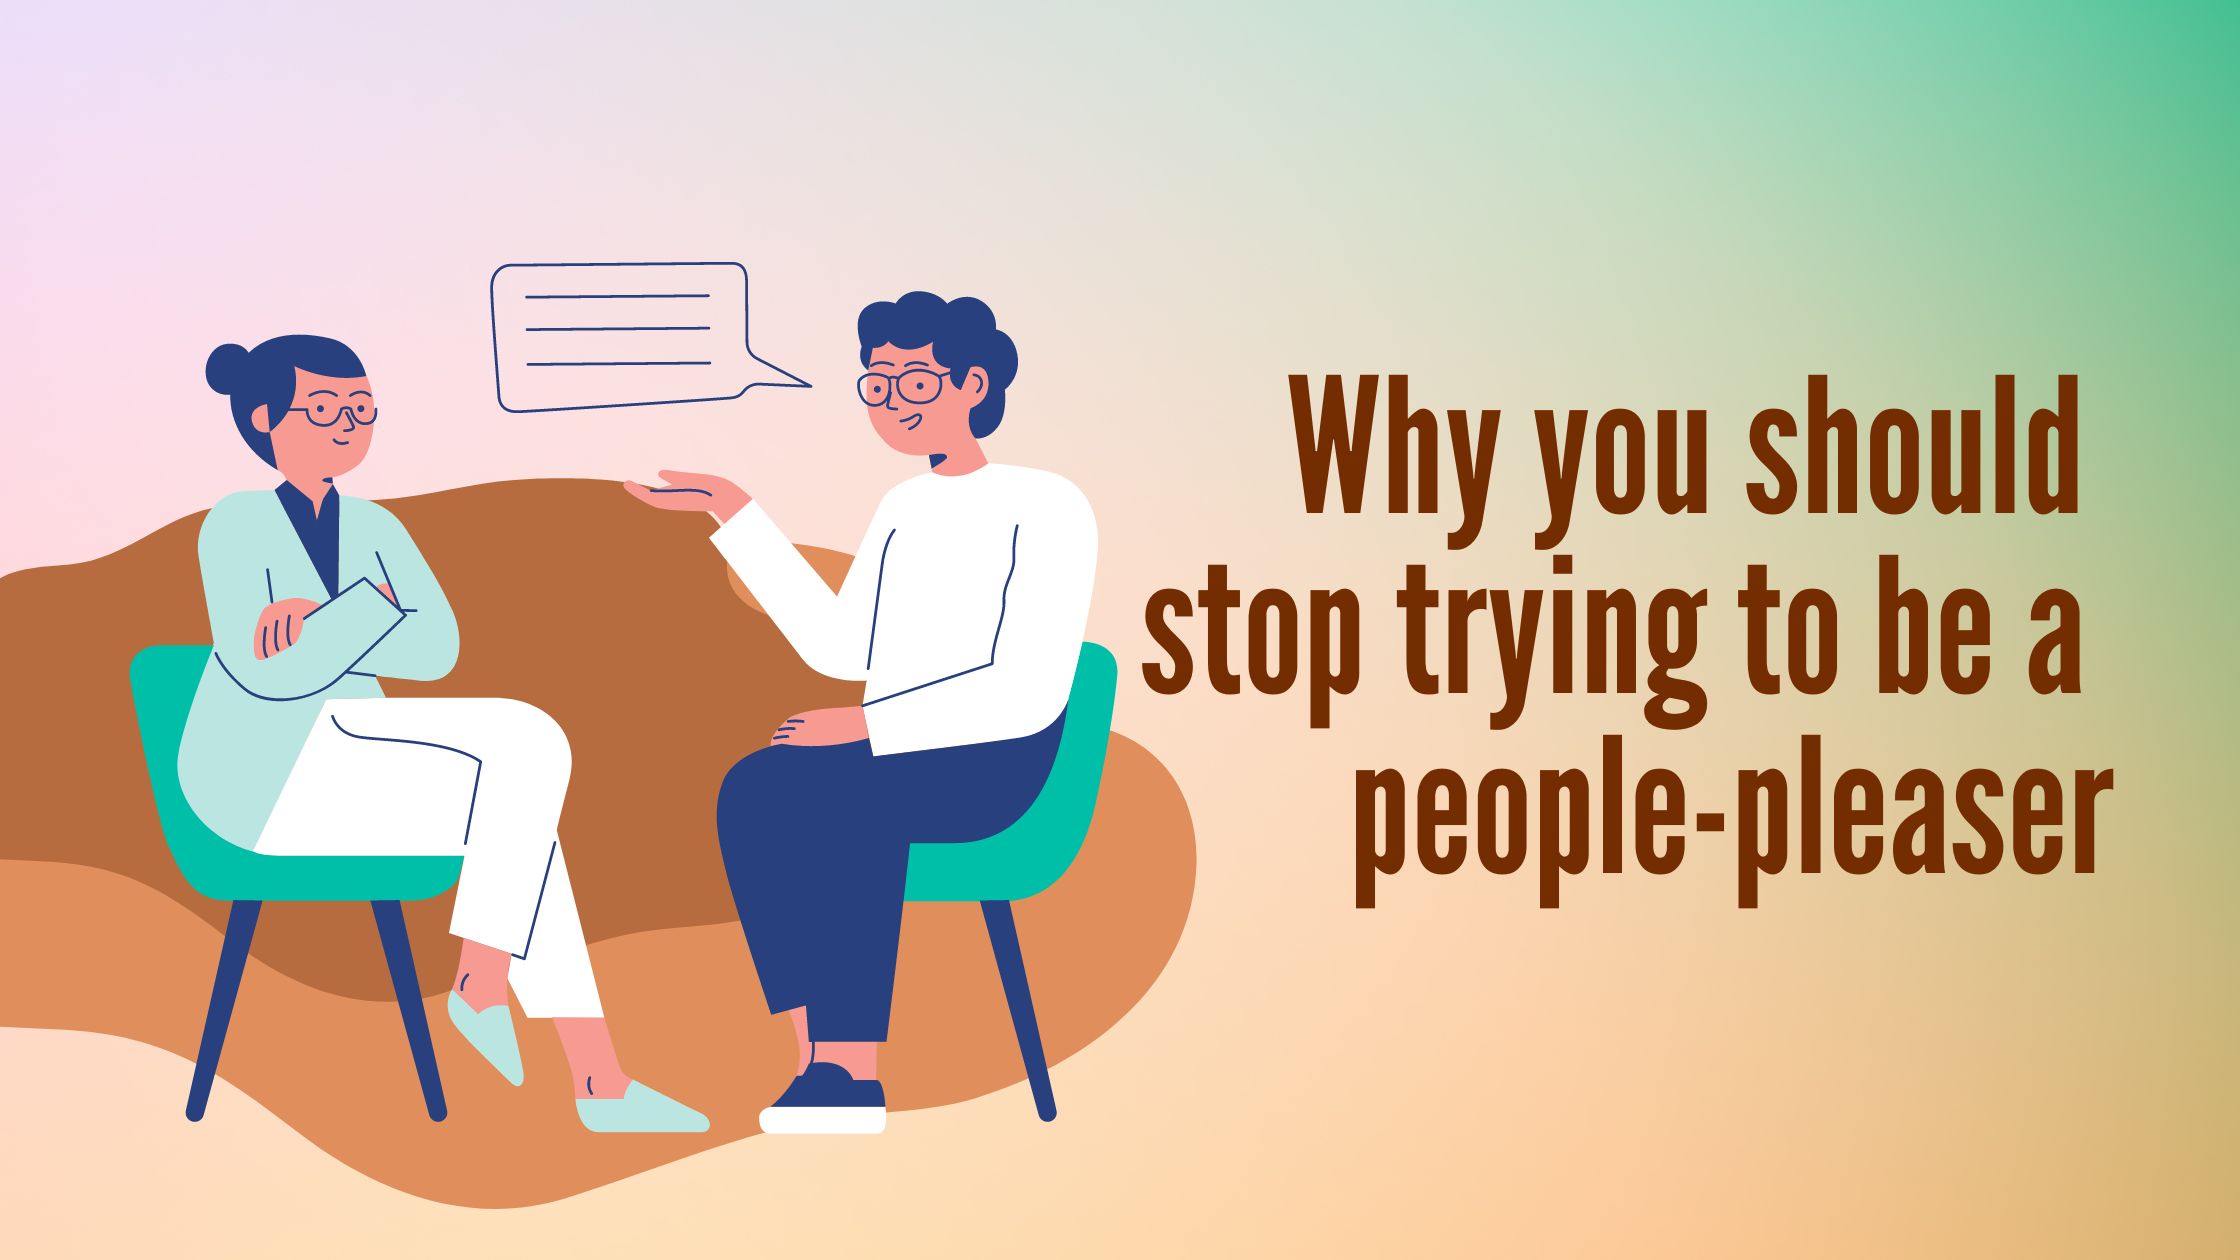 Why you should stop trying to be a people-pleaser